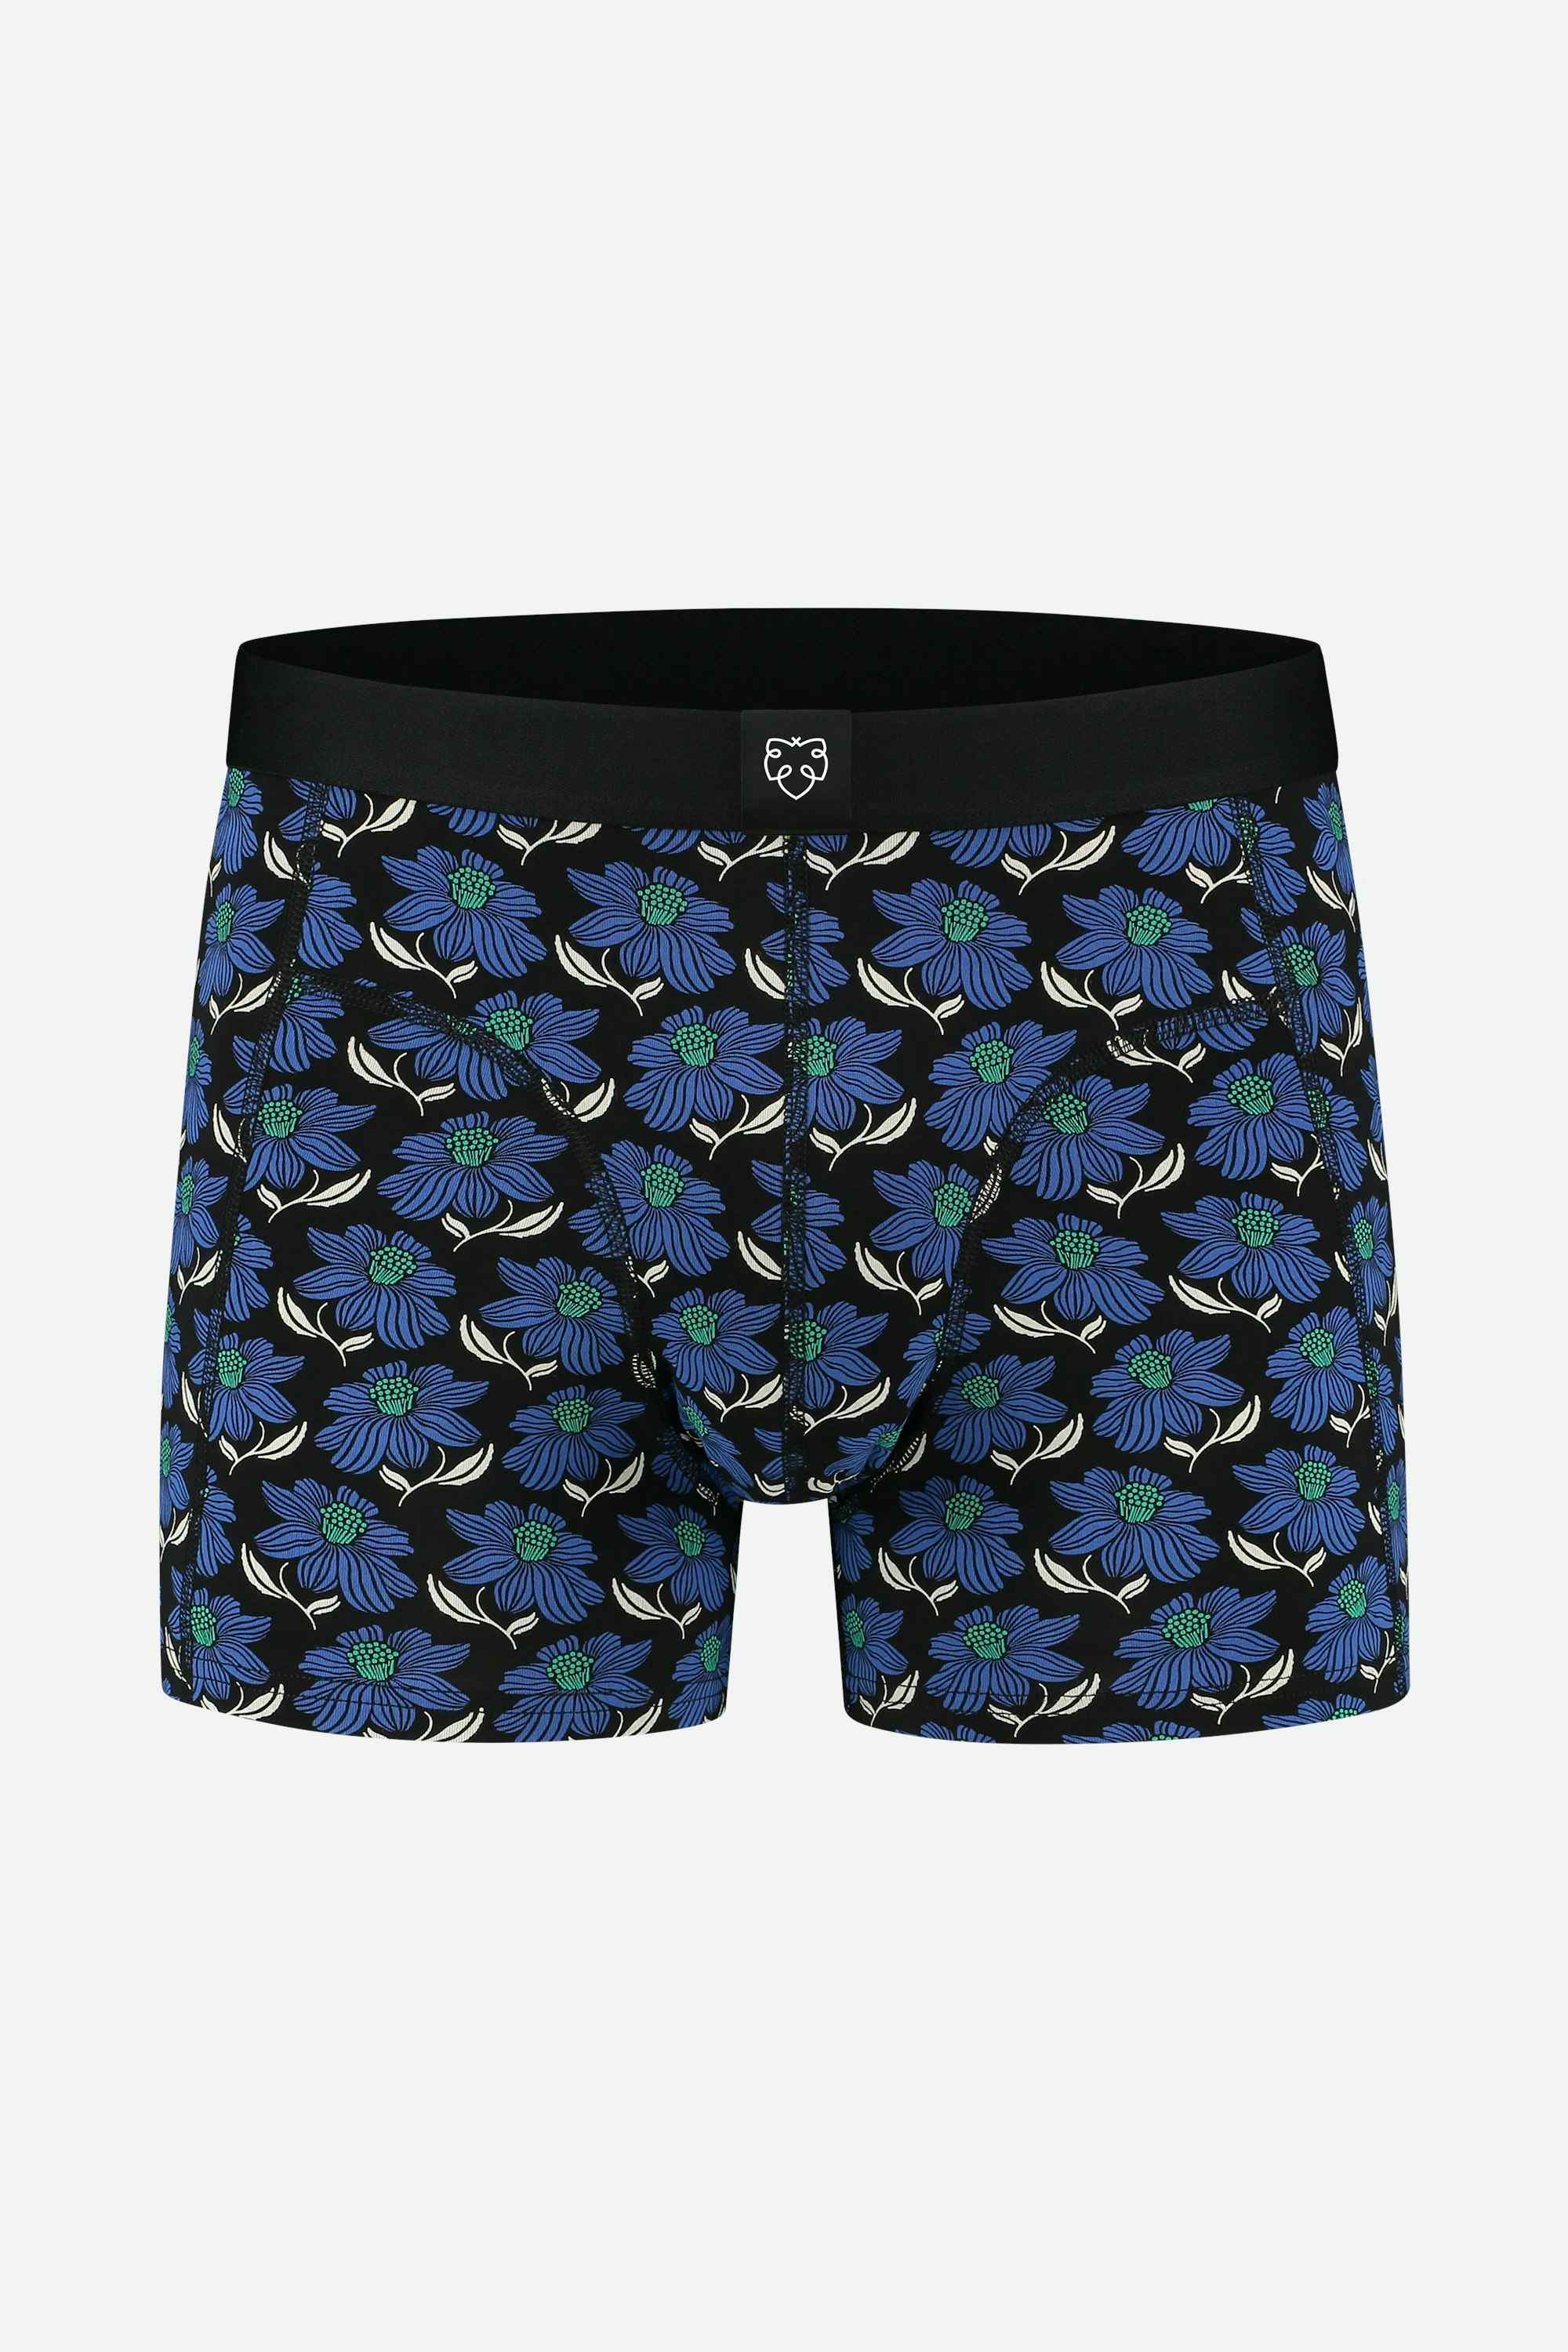 A-dam black boxer briefs with flowers print from pure organic cotton